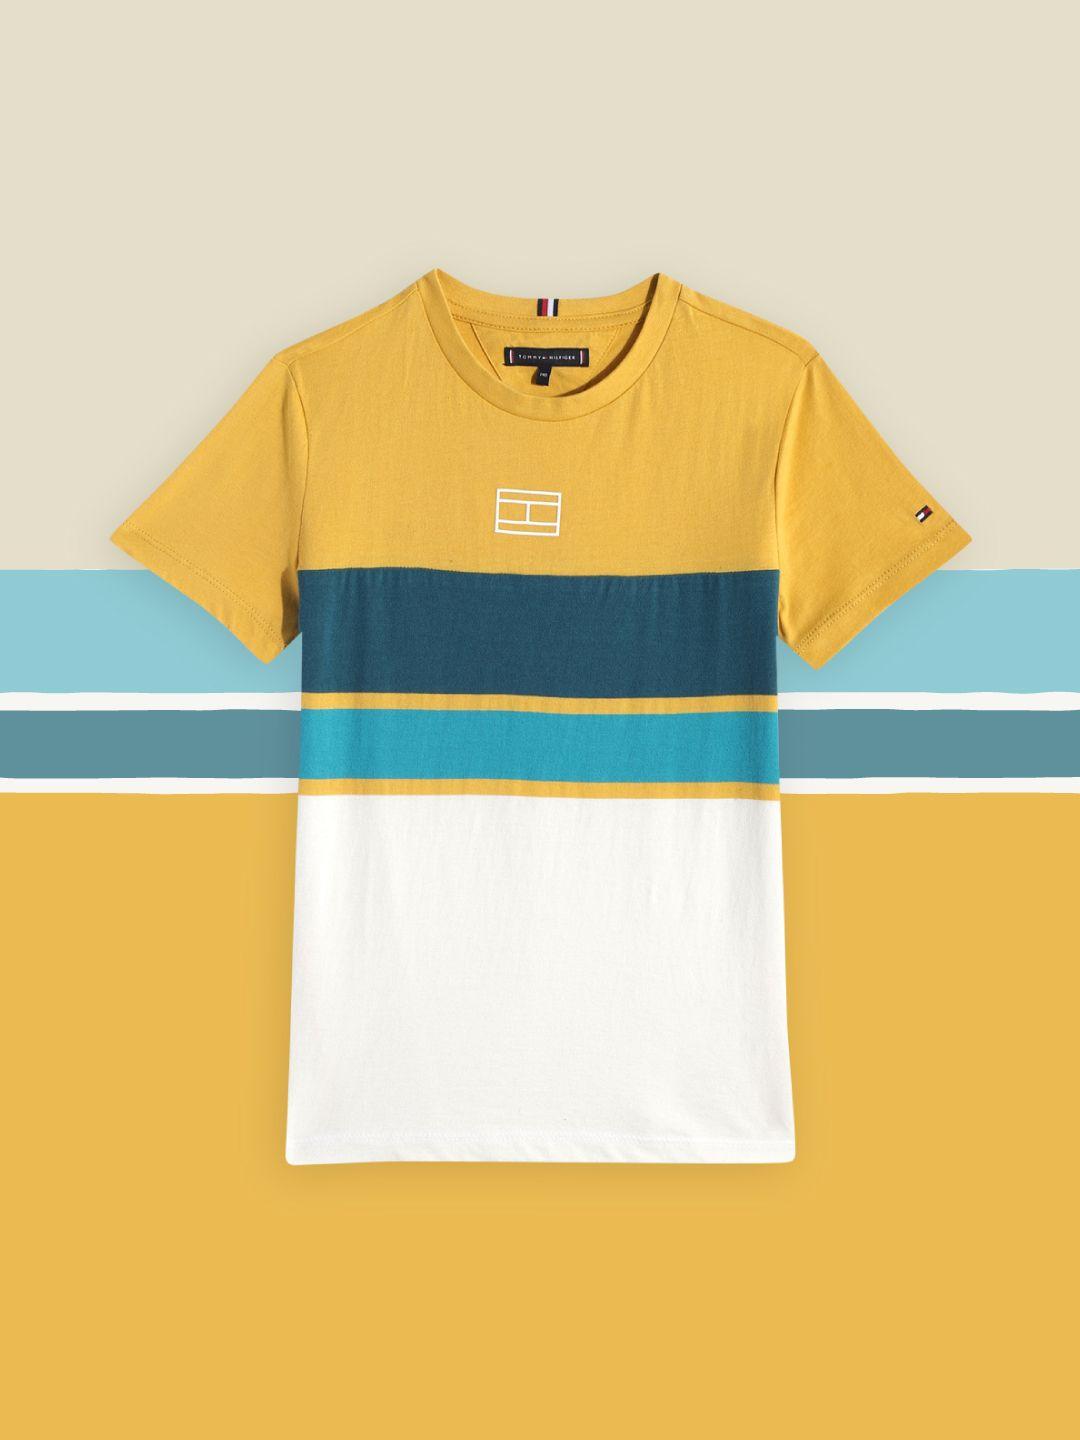 tommy hilfiger boys yellow & blue striped pure cotton t-shirt